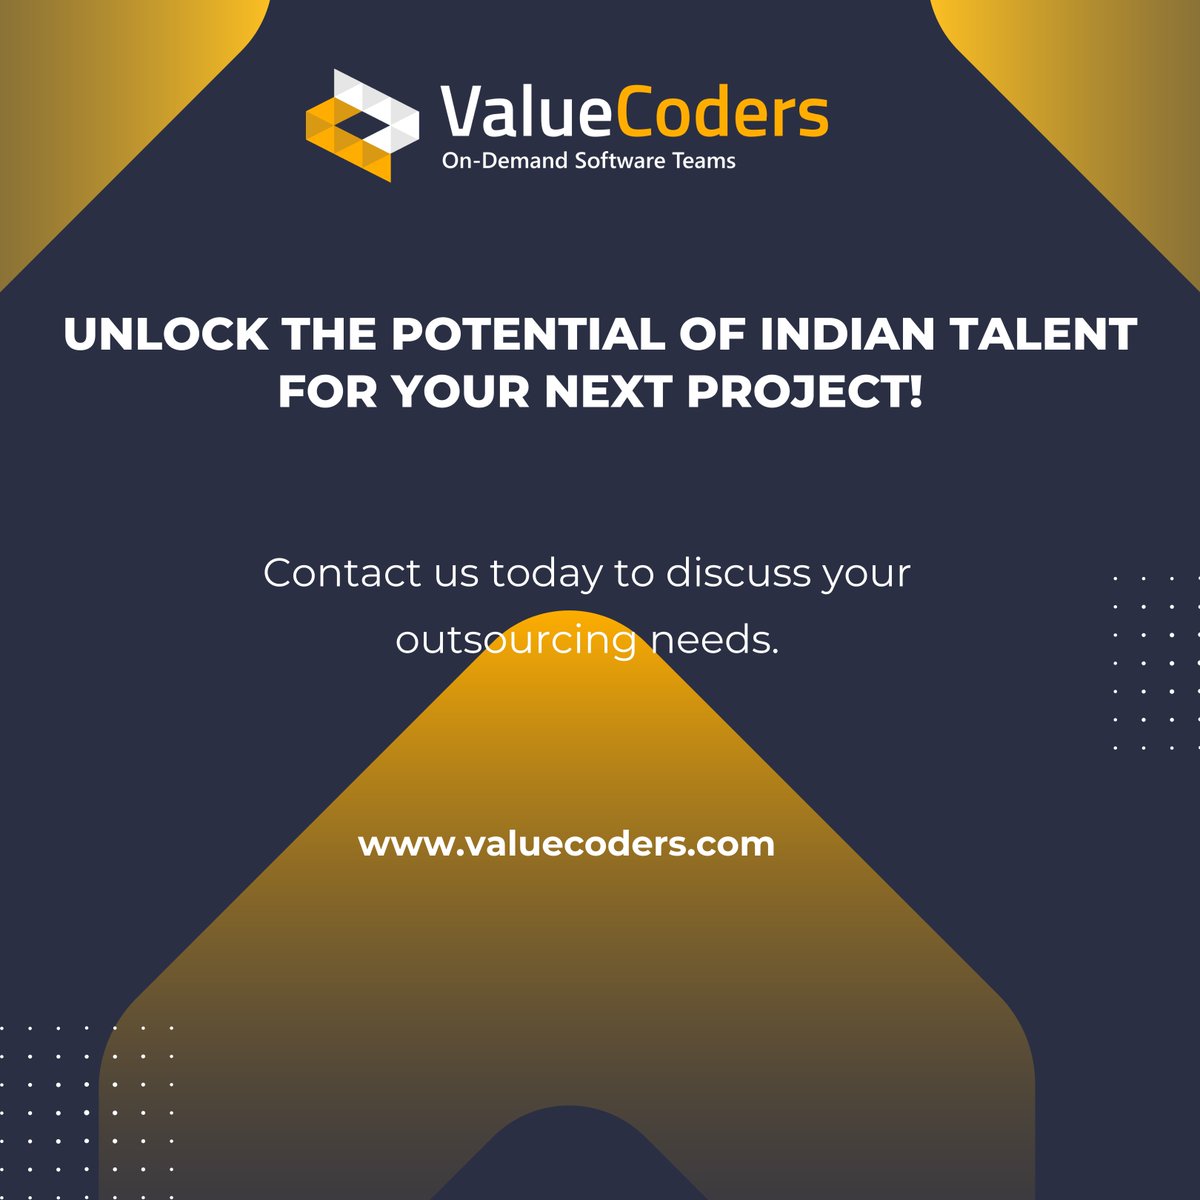 Struggling to reduce development cost? Hiring Full Stack Developers from India could be the ultimate solution. Contact our experts today - valuecoders.com/contact #FullStackDevelopers #HireDevelopers #TechTalent #Outsourcing #ValueCoders